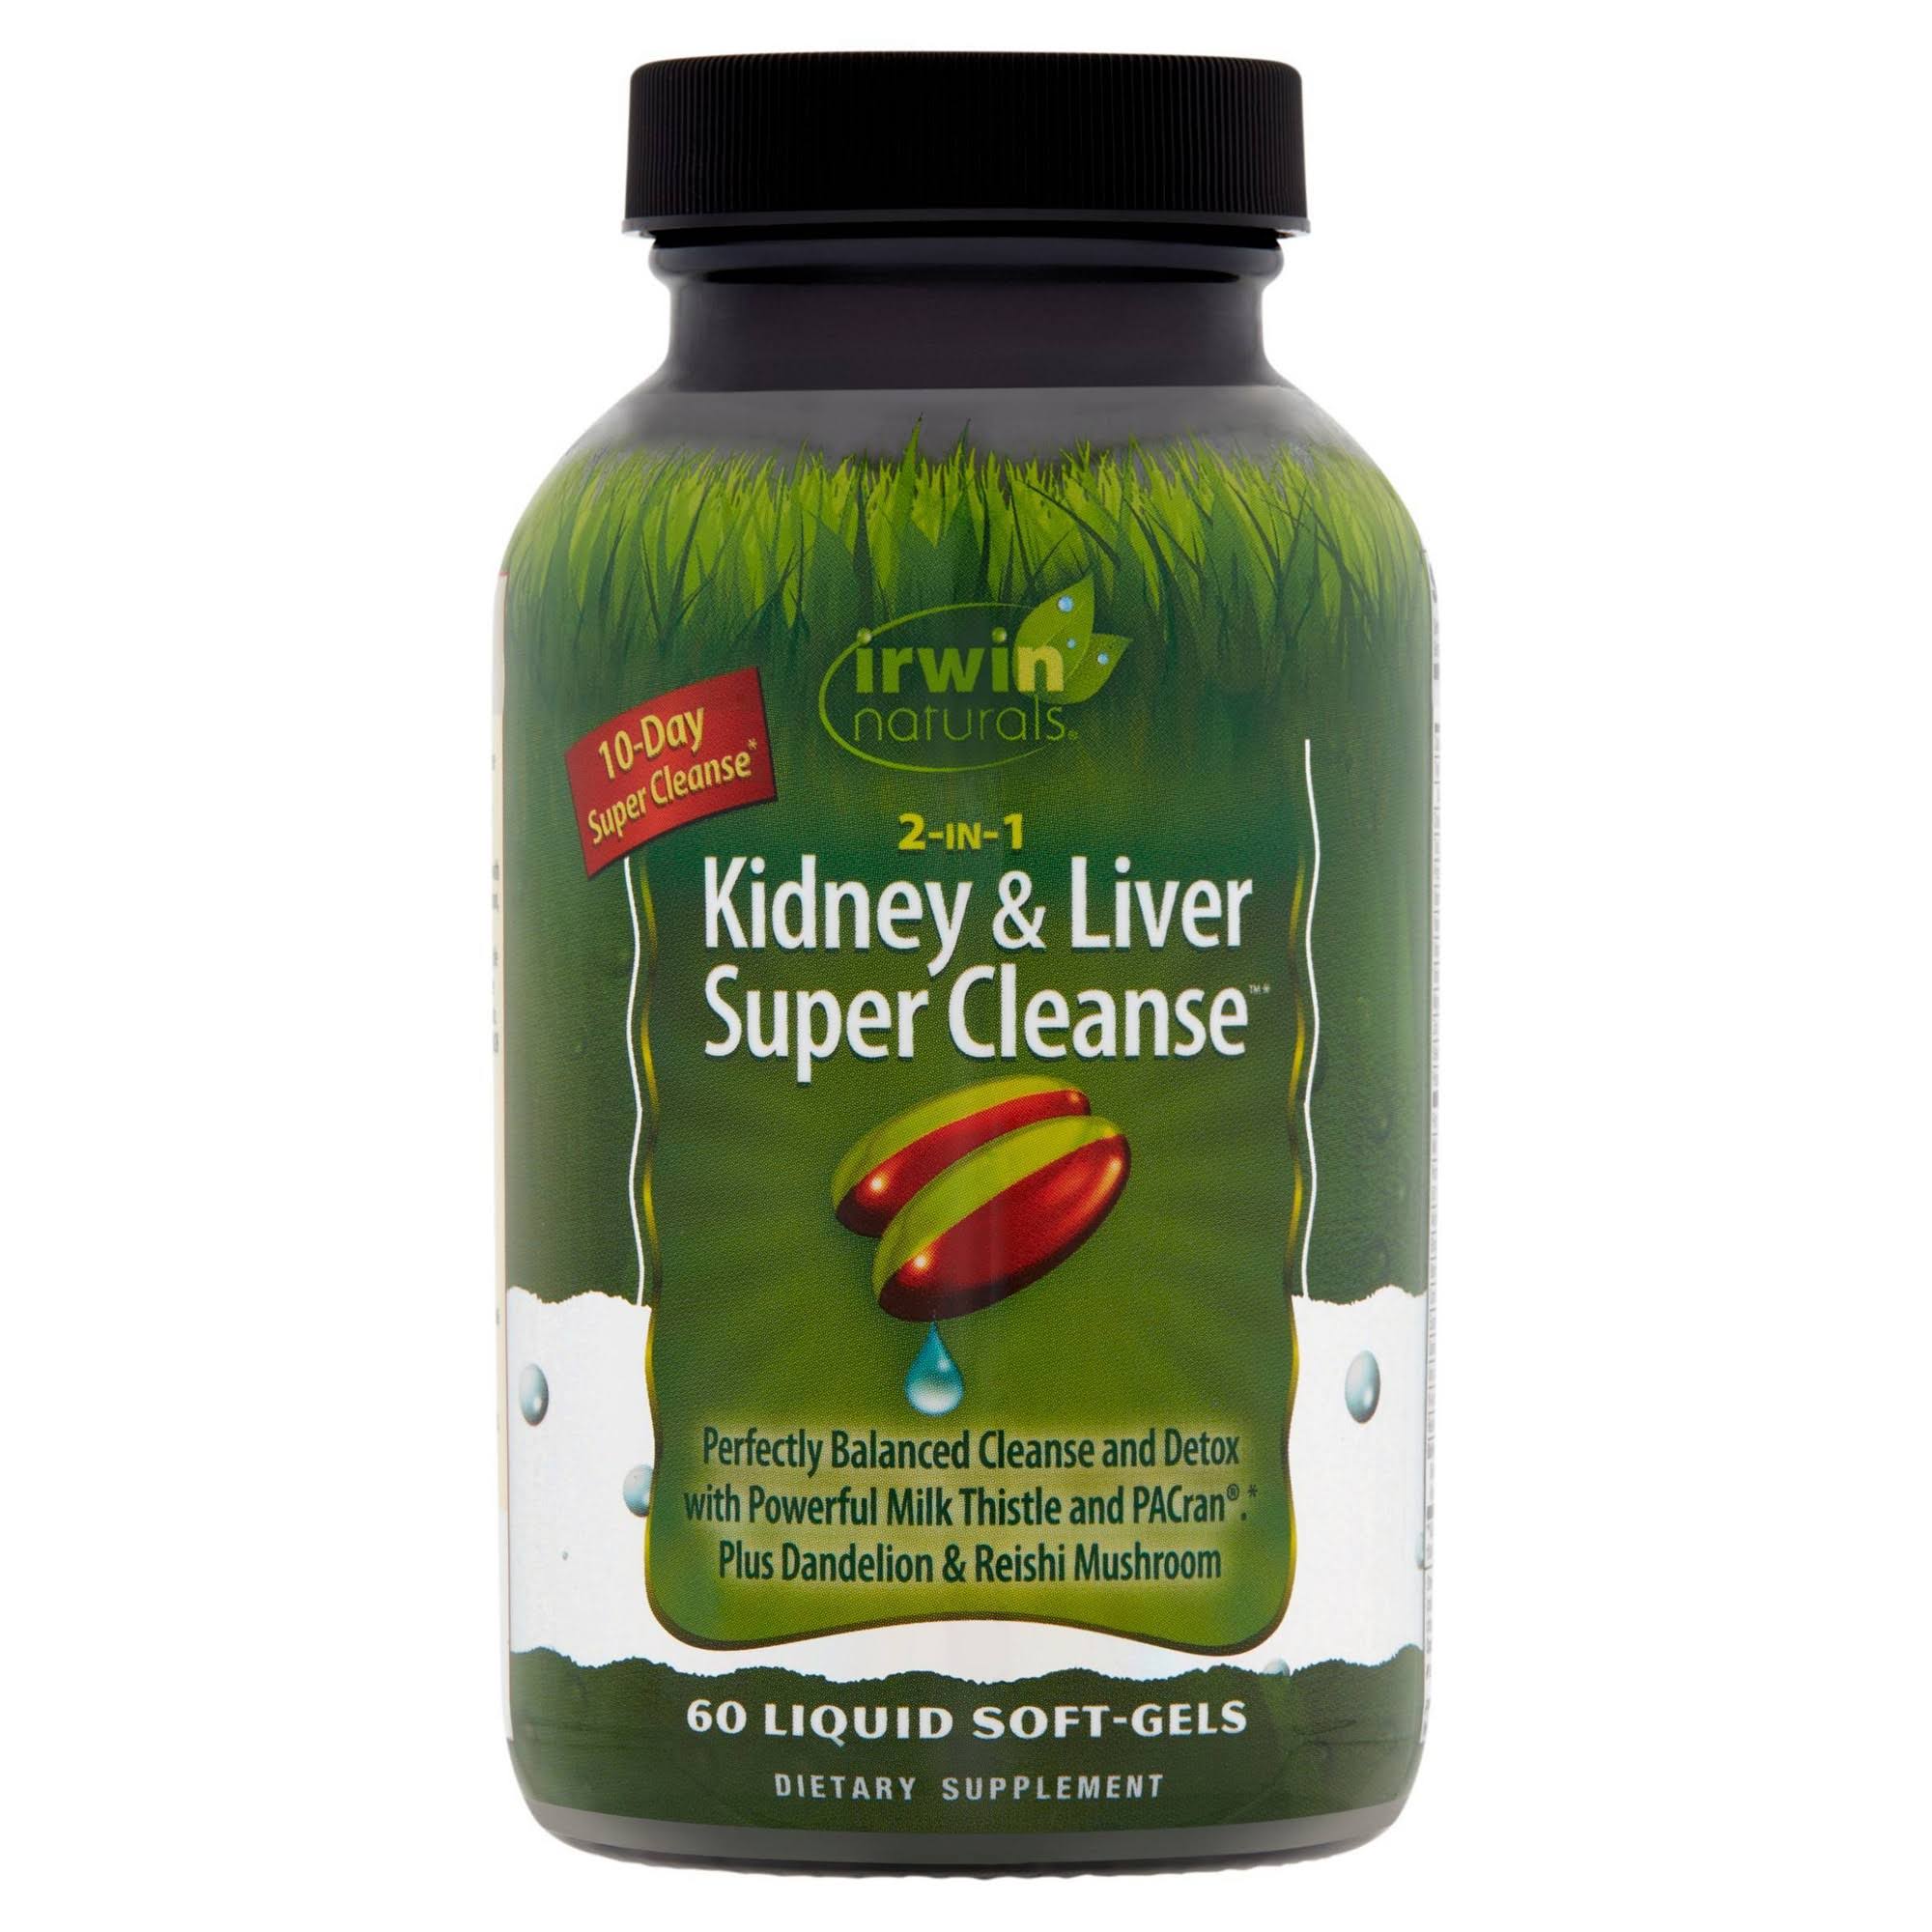 Irwin Naturals 2-in-1 Kidney + Liver Super Cleanse 10 Day Detox with M